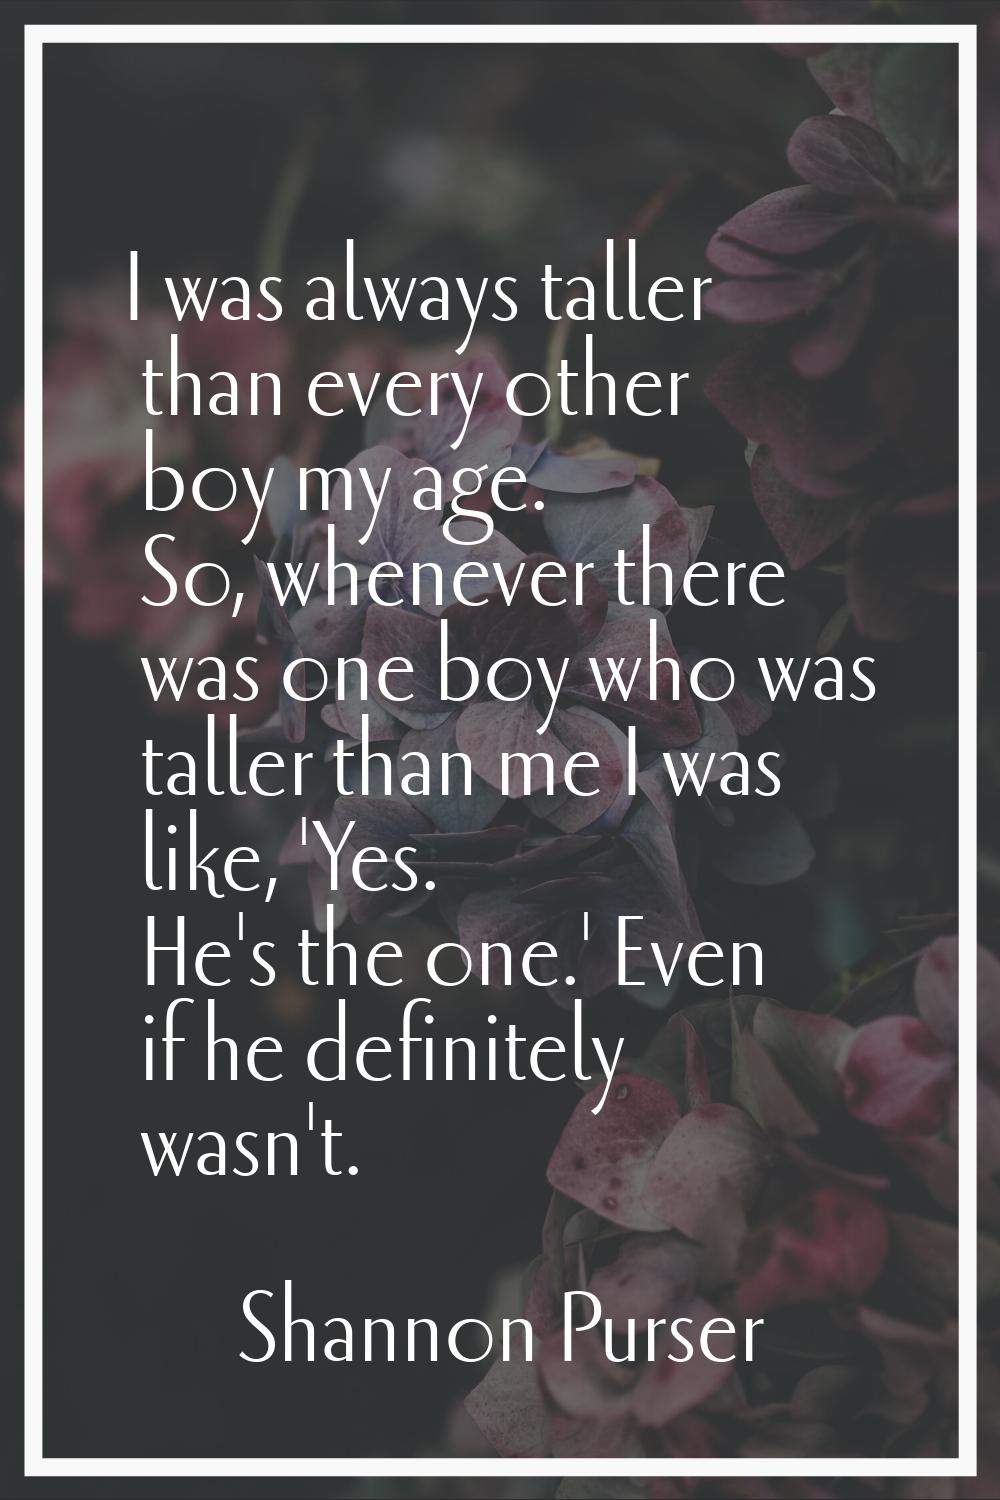 I was always taller than every other boy my age. So, whenever there was one boy who was taller than